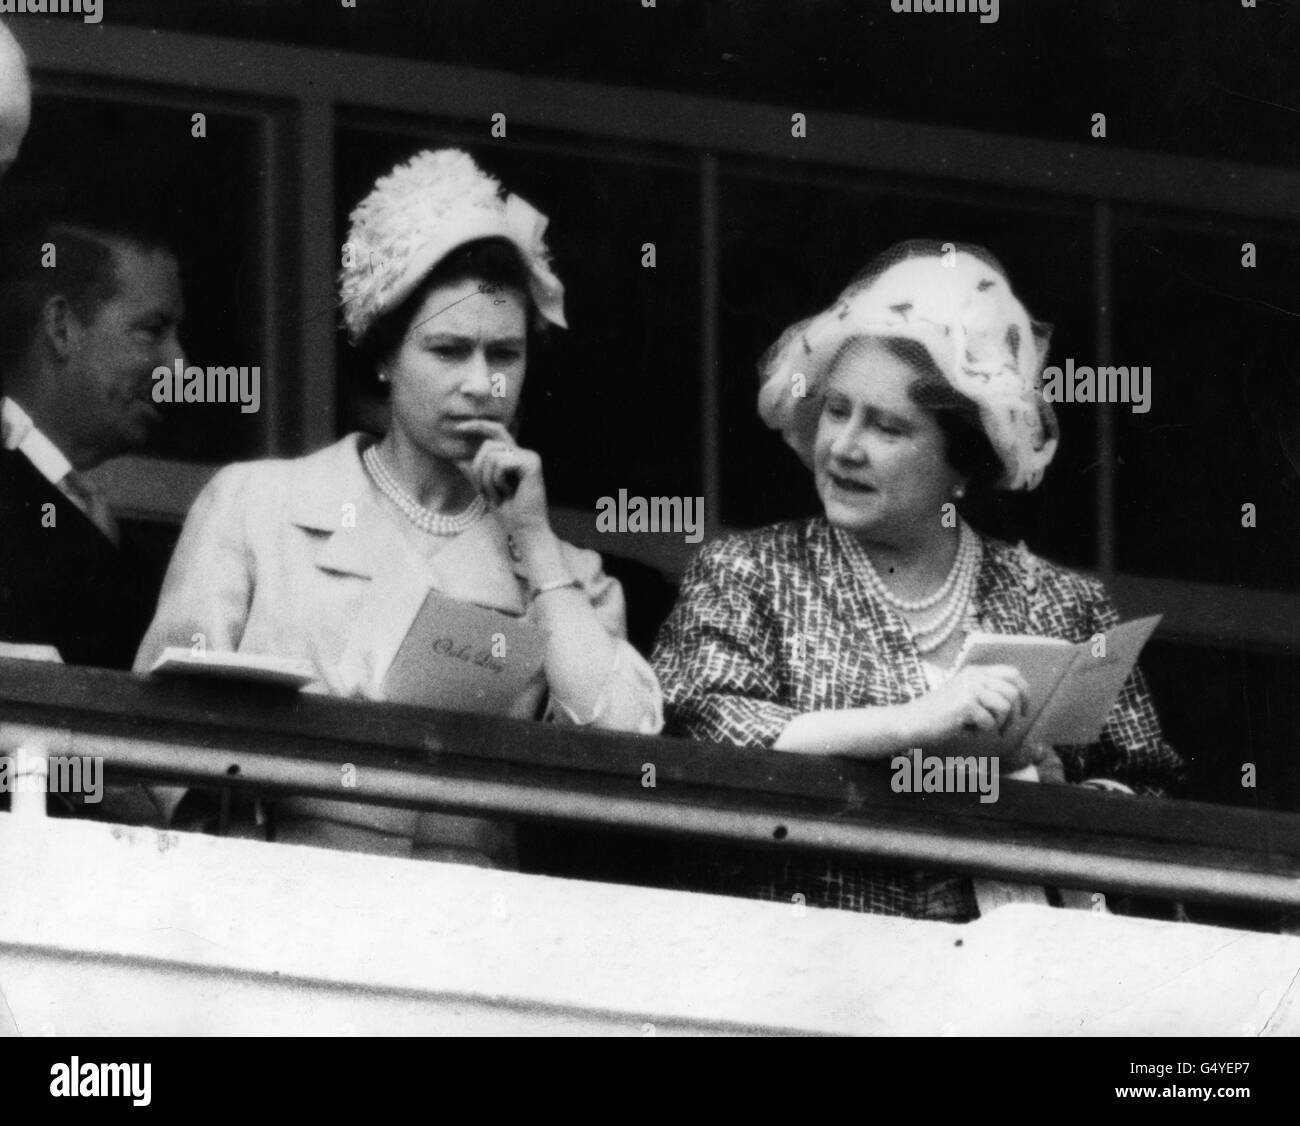 Queen Elizabeth II and the Queen Mother studying race cards in the Royal box on Oaks Day at Epsom, Surrey. They saw the Queen's entry 'Highlight', finish unplaced. Stock Photo